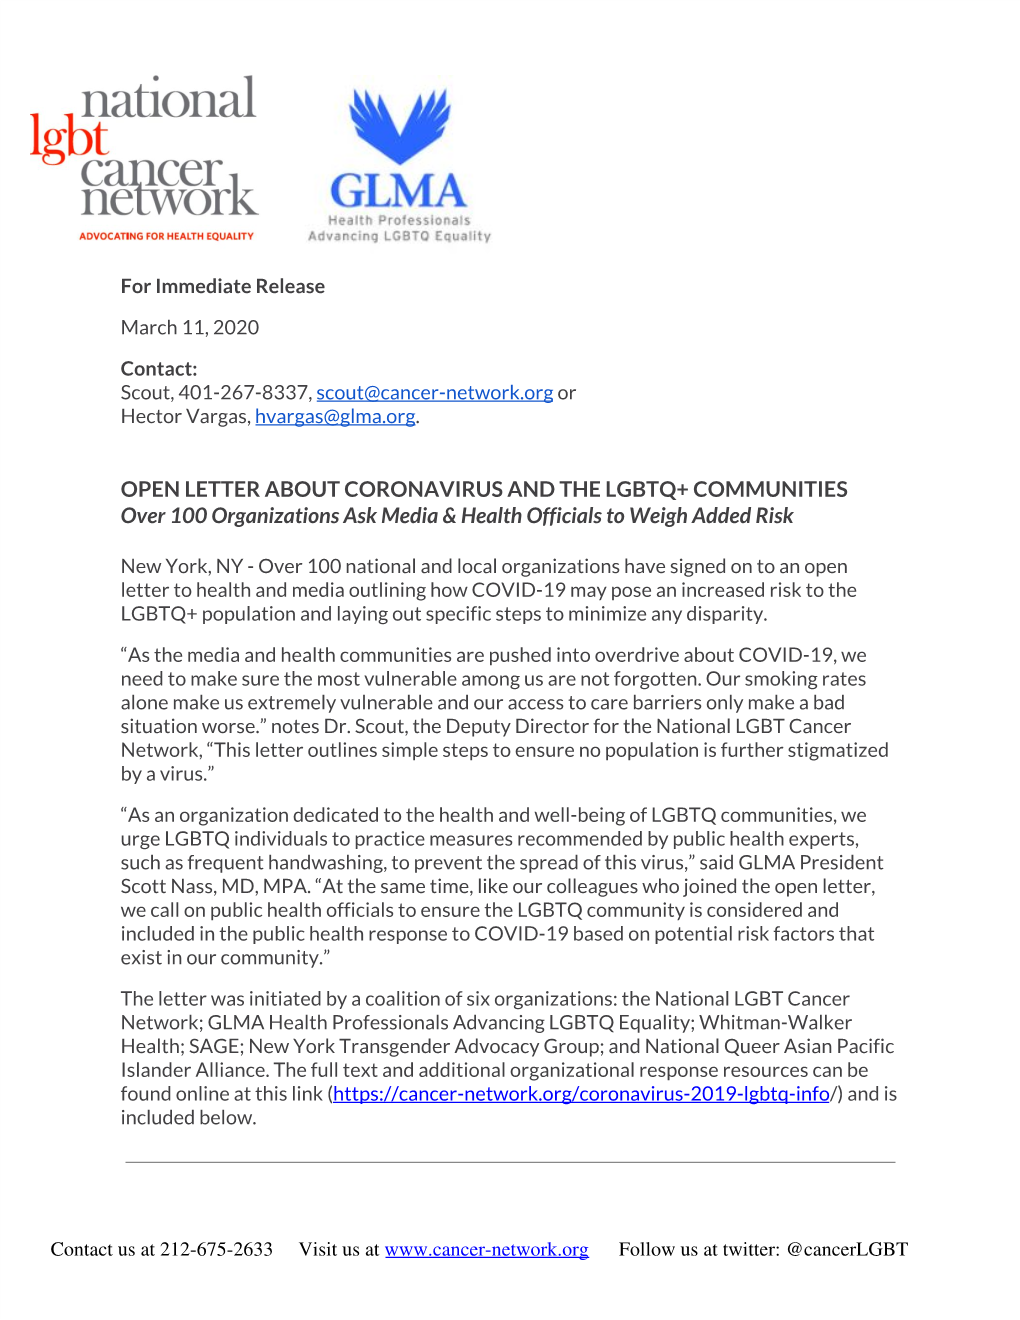 Open Letter About the Coronavirus and the LGBTQ+